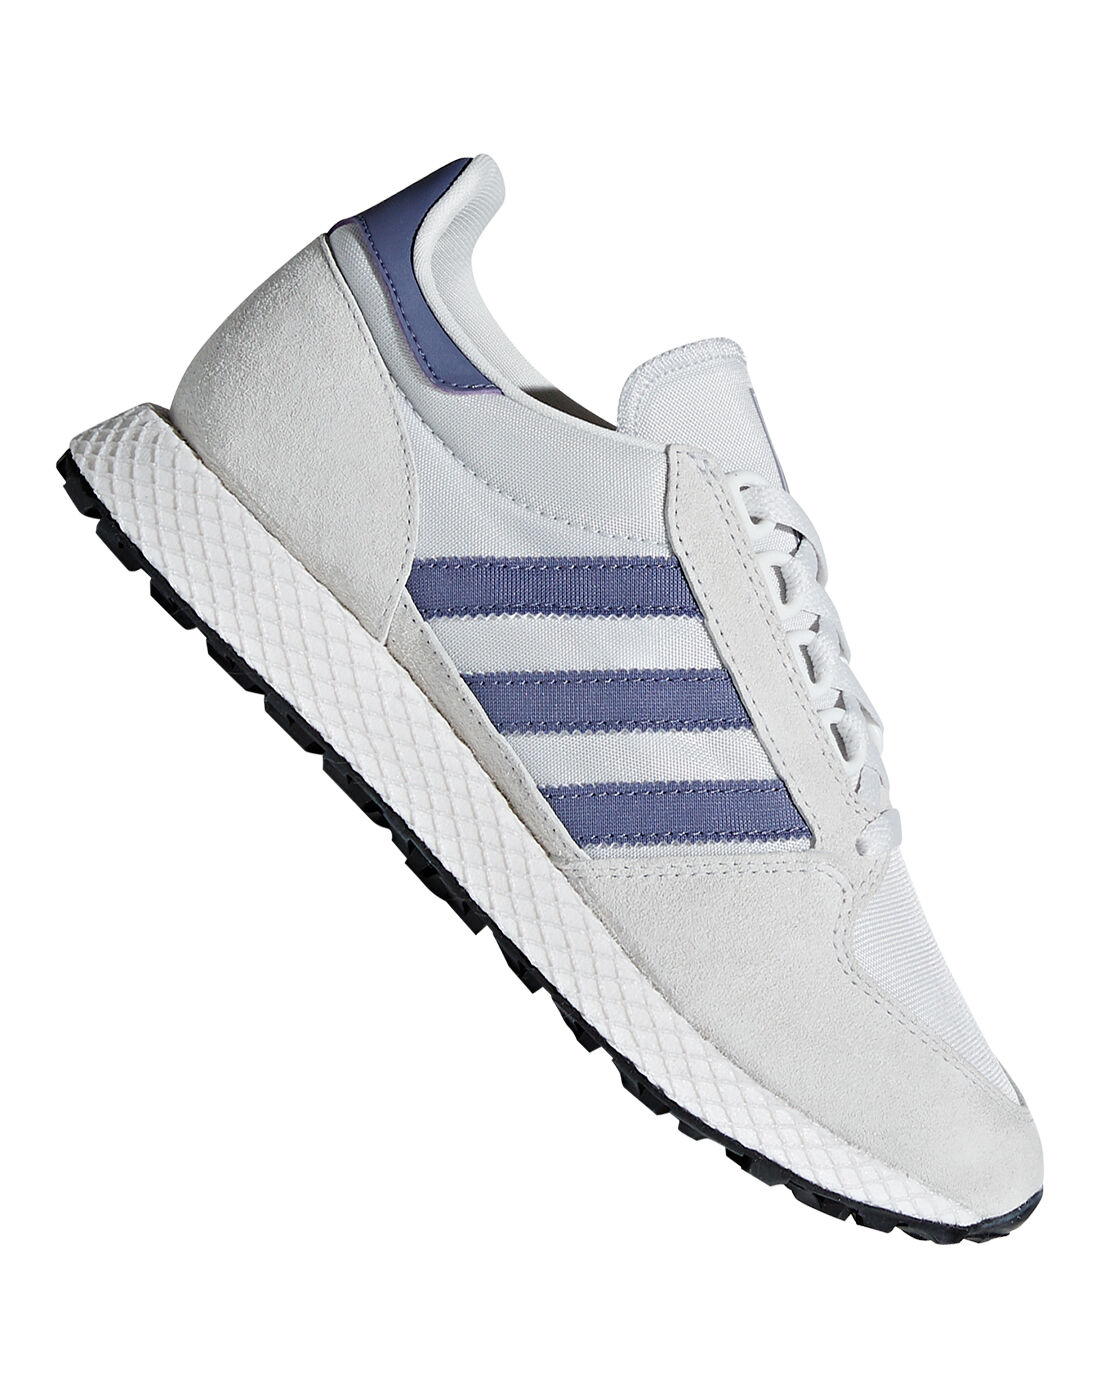 adidas forest grove women's trainers